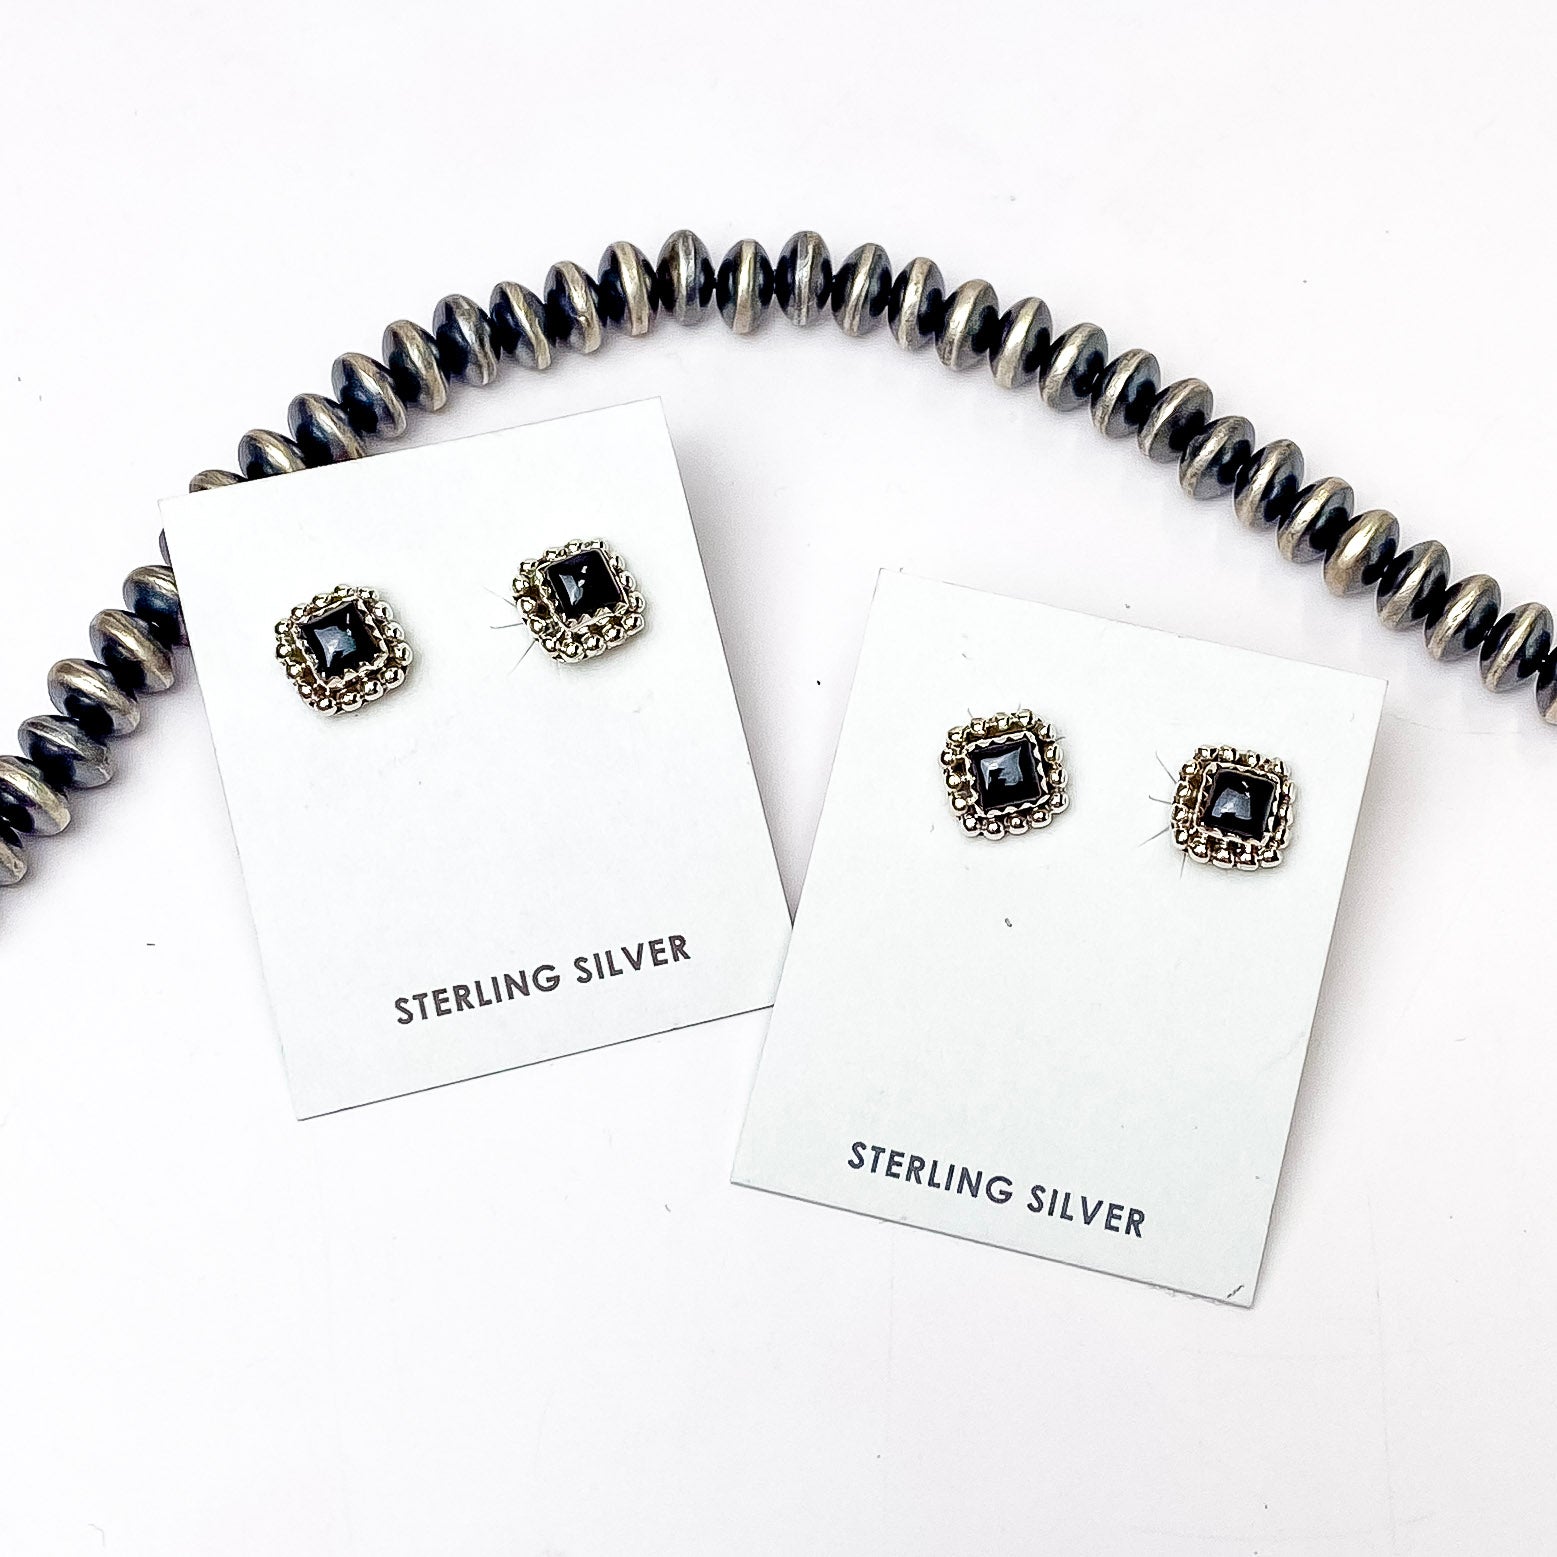 In the picture are sterling silver square shaped stud earrings with black onyx stones with a white background